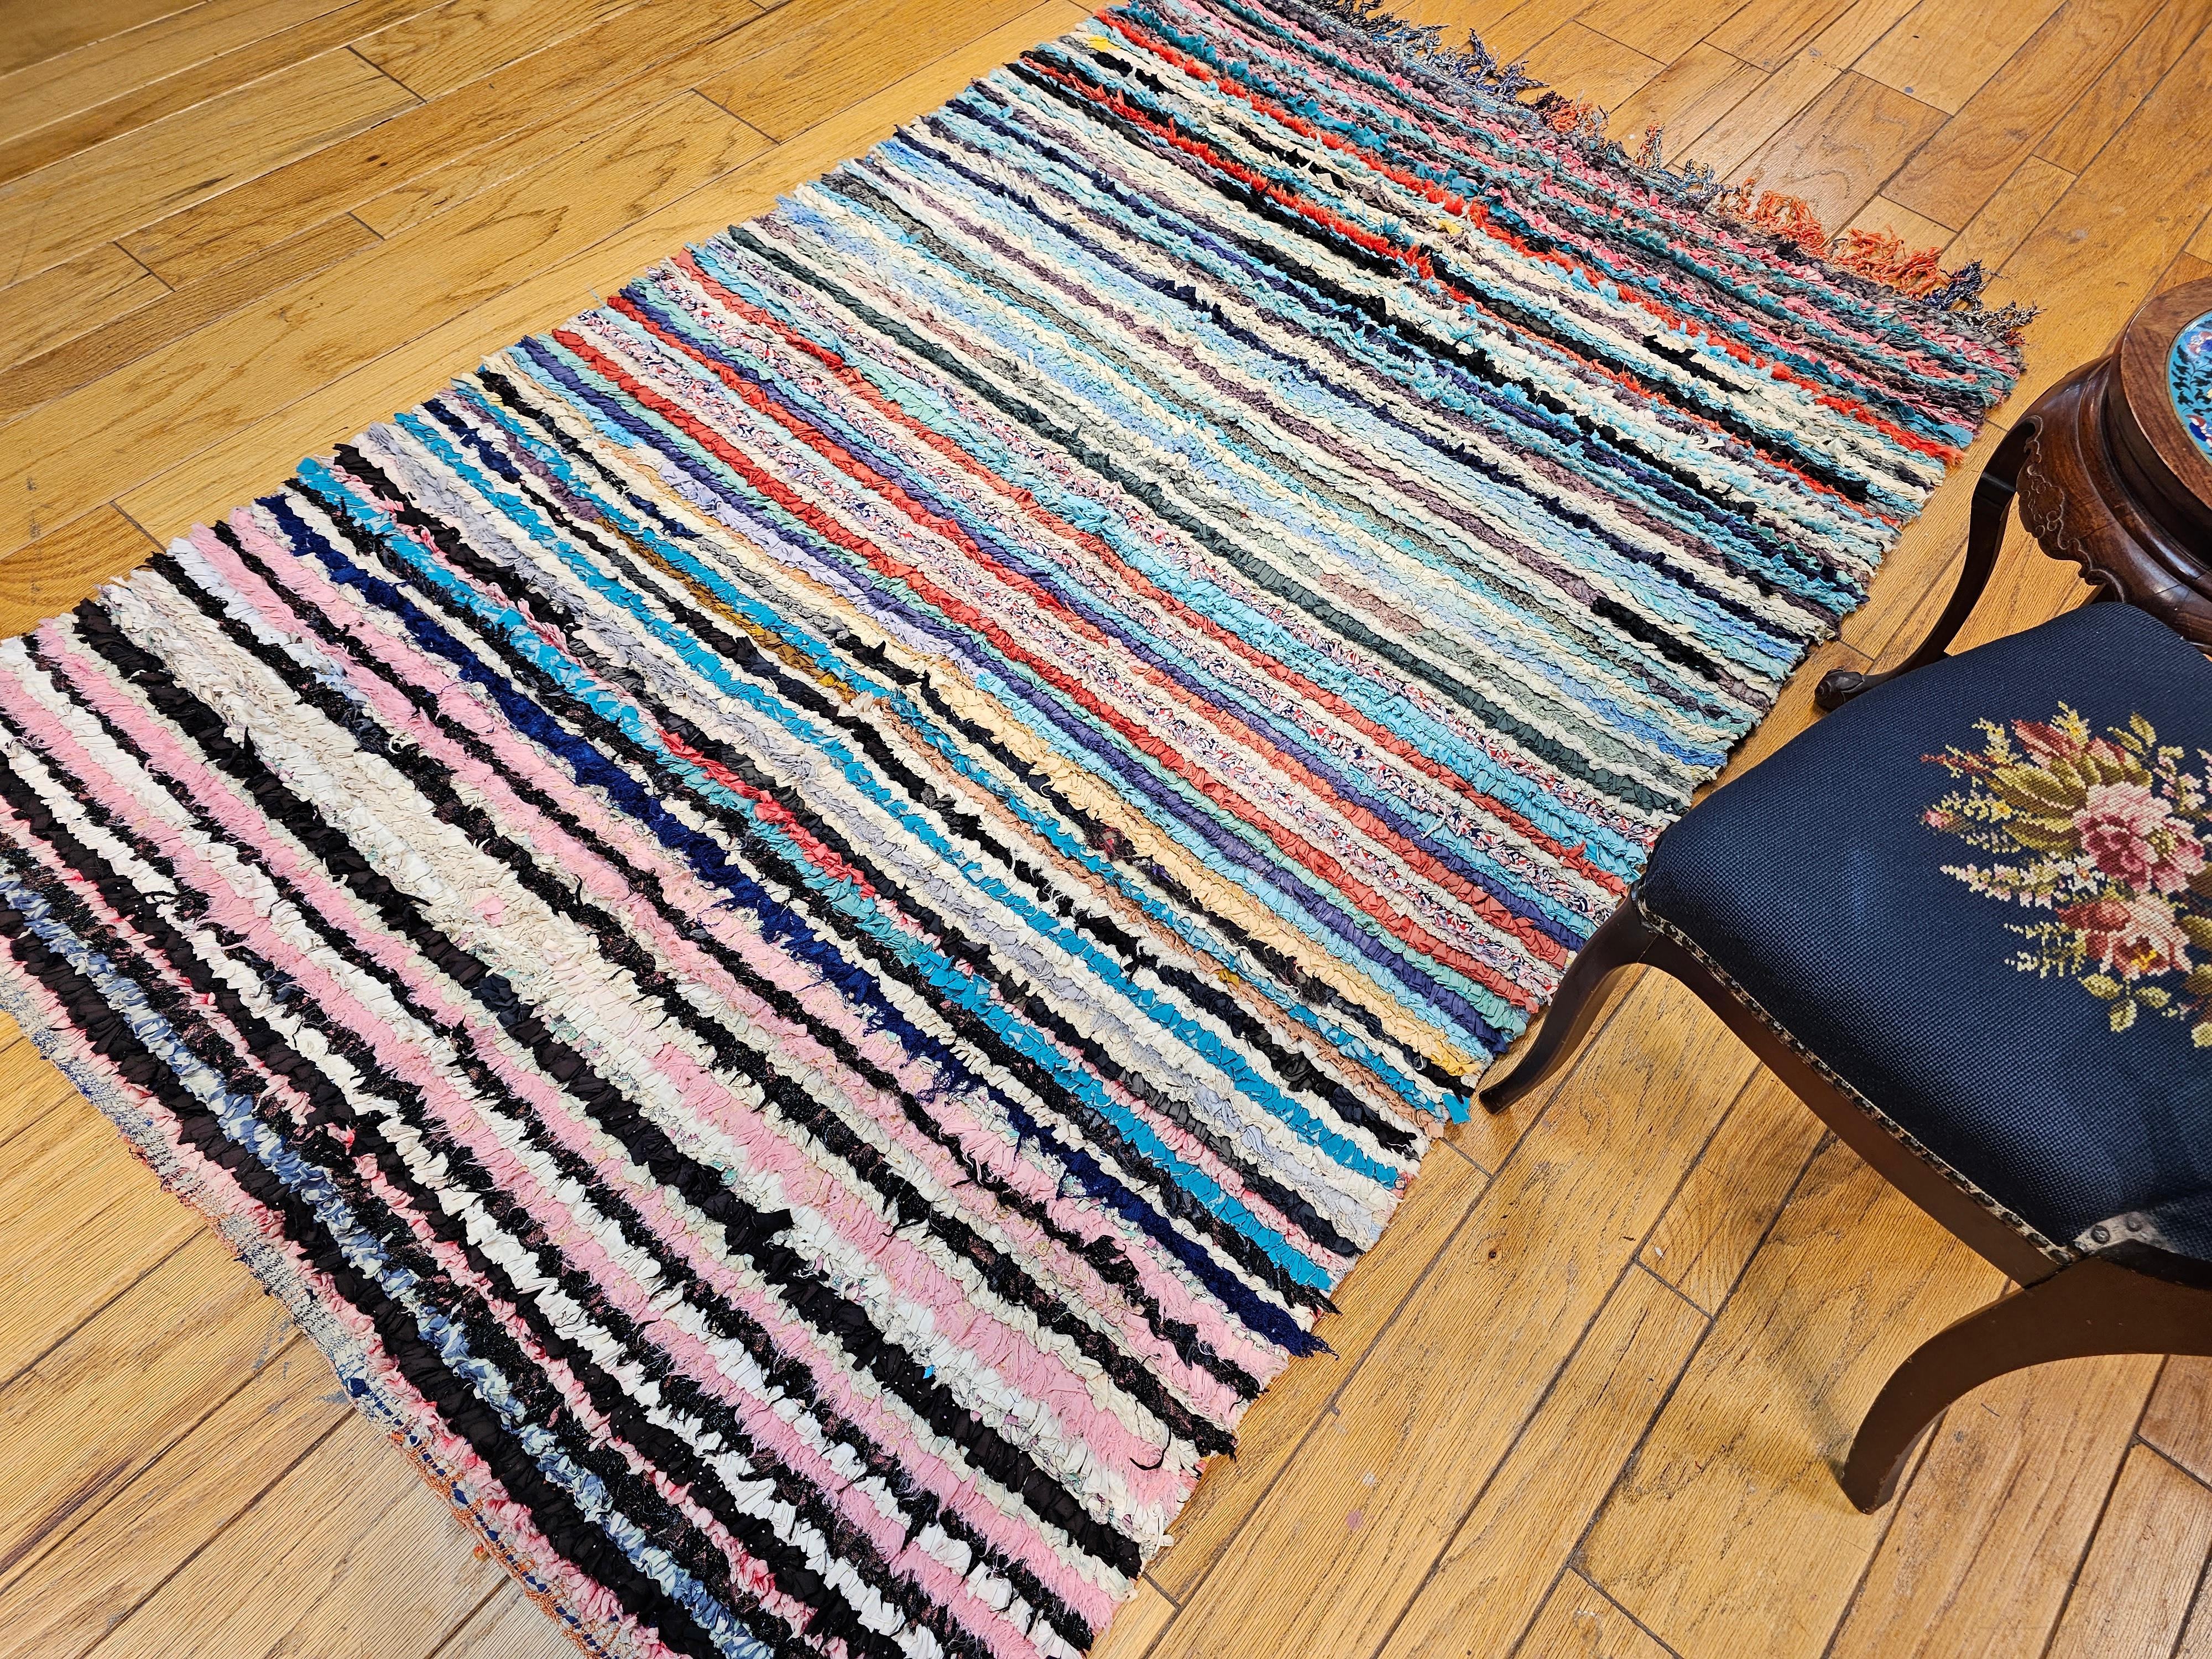 Vintage Handwoven Moroccan Boucherouite Shag Rug in Stripe Pattern In Good Condition For Sale In Barrington, IL